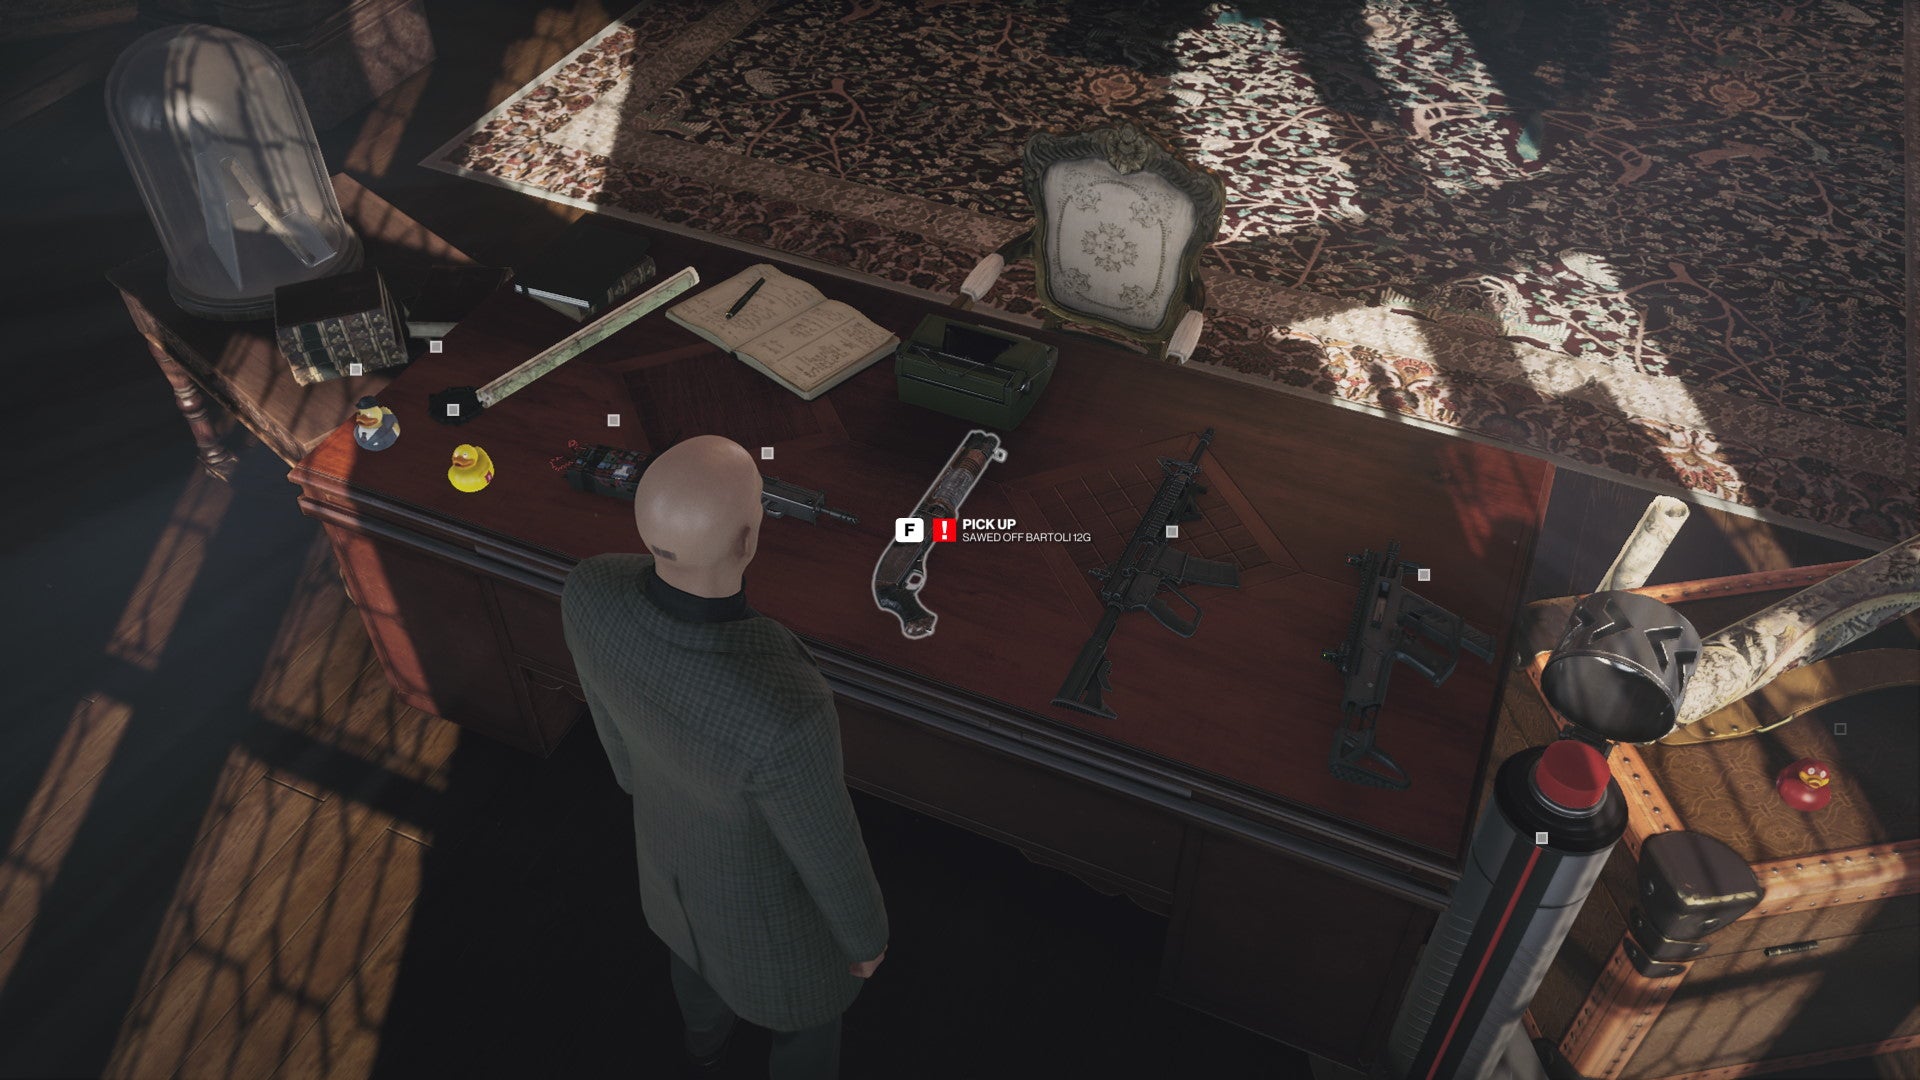 A screenshot of Hitman 3's interactive Dartmoor benchmark, showing Agent 47 standing in front of table full of weapons in an old study.